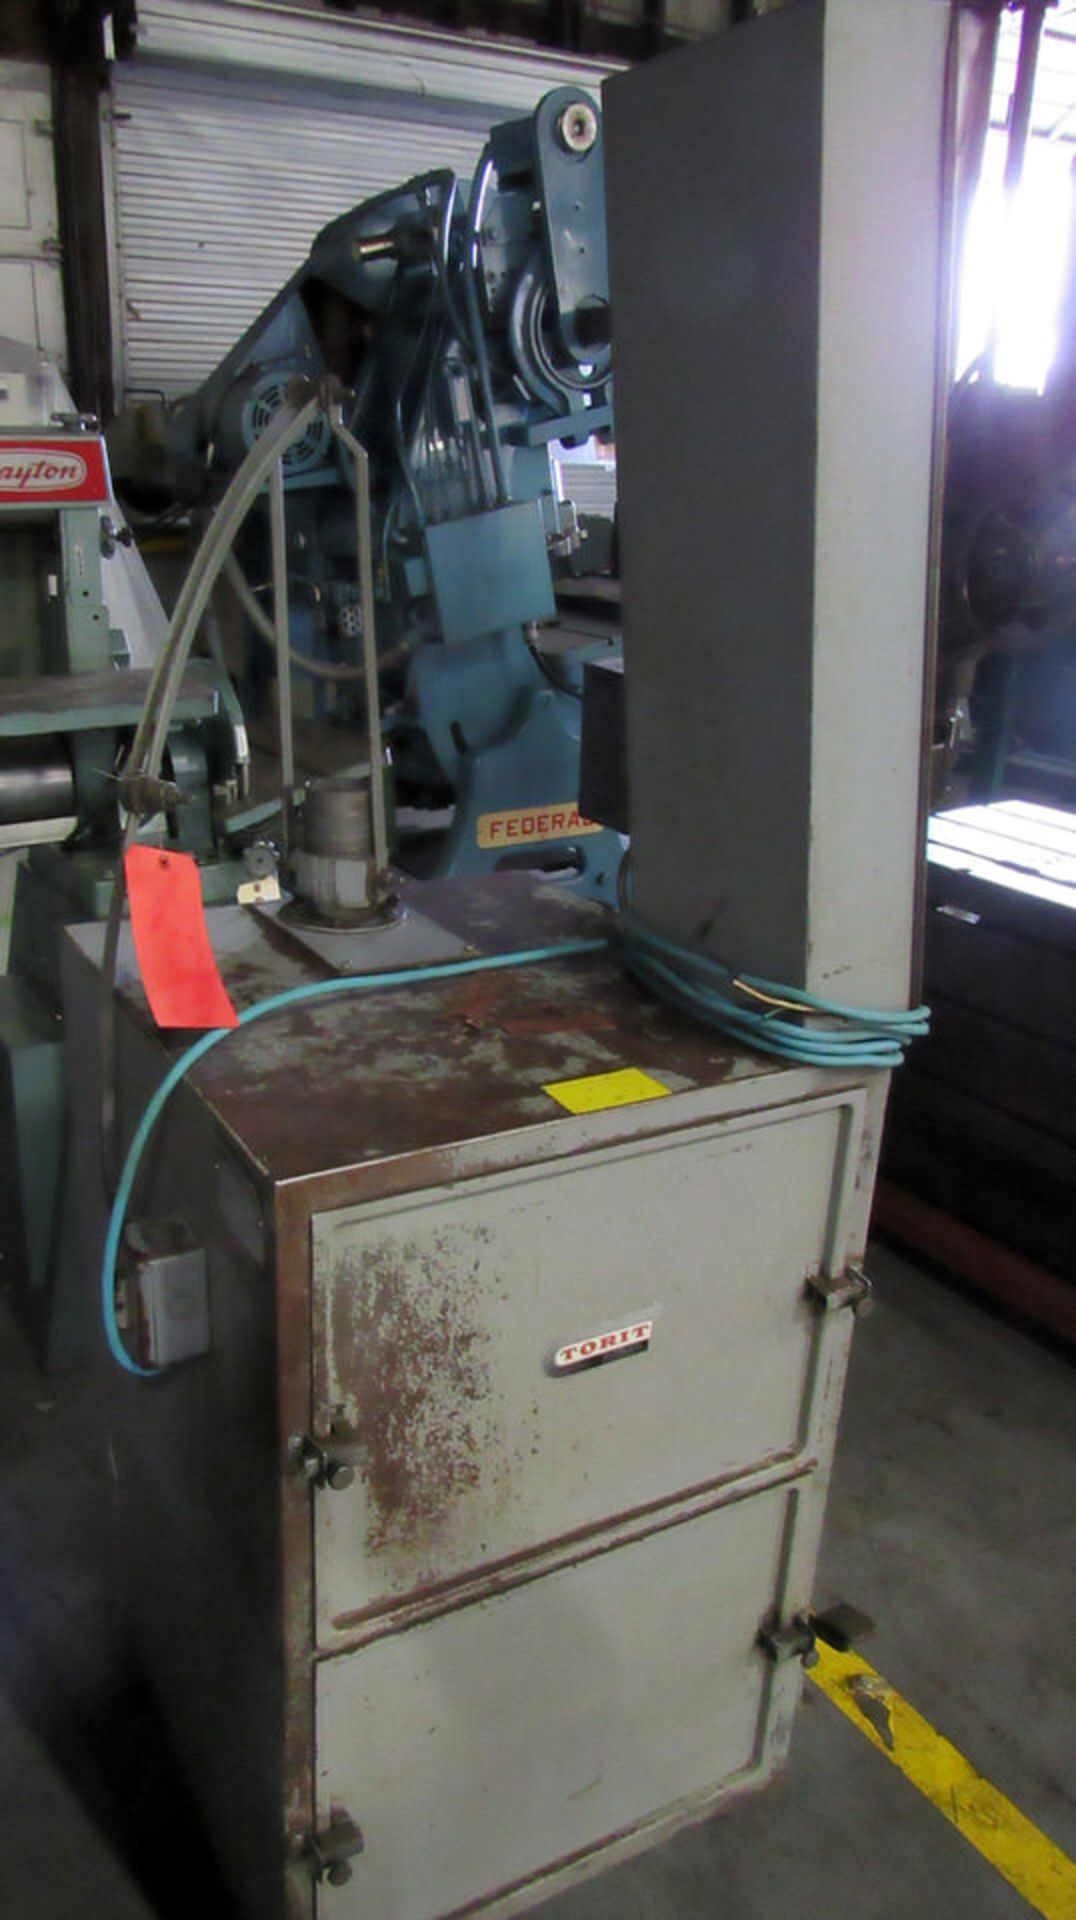 Powermatic Model 66 Bench Grinder with Torit Dust Collector, 3/4 hp motor, 5" dia. grinding wheel ( - Image 6 of 8